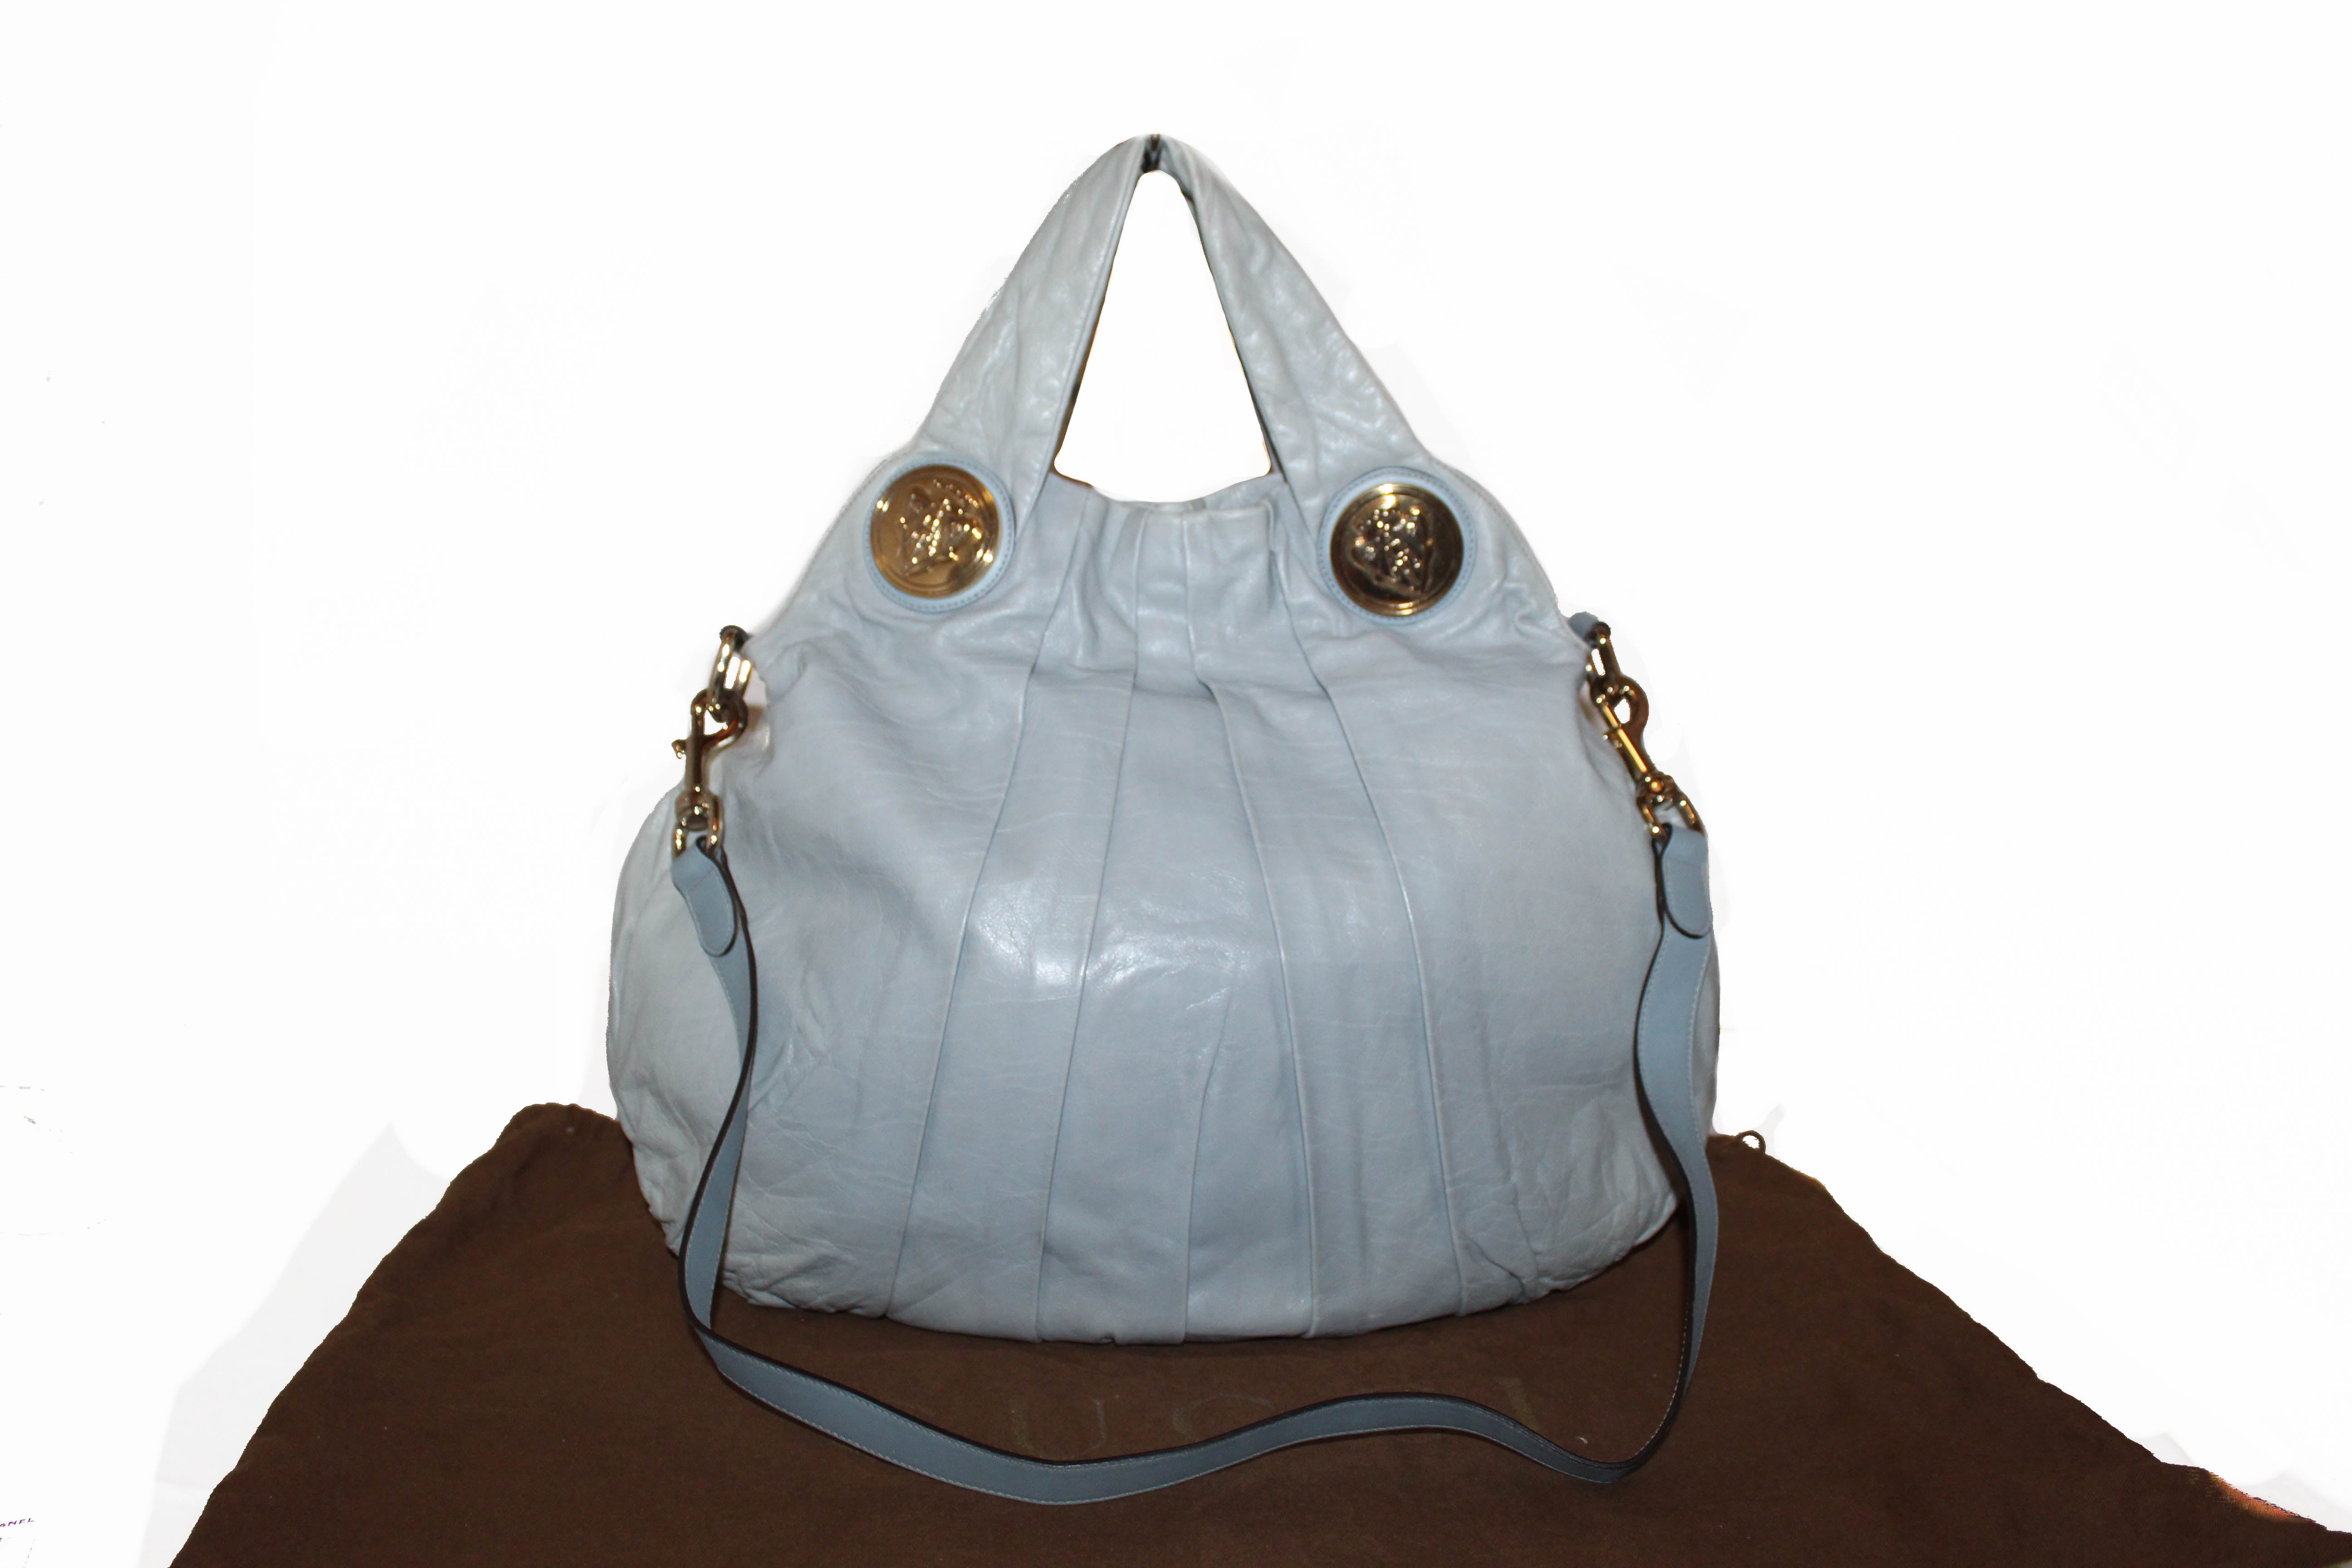 Authentic Gucci Blue Leather Hysteria Hobo Tote Bag with Long Strap 197016